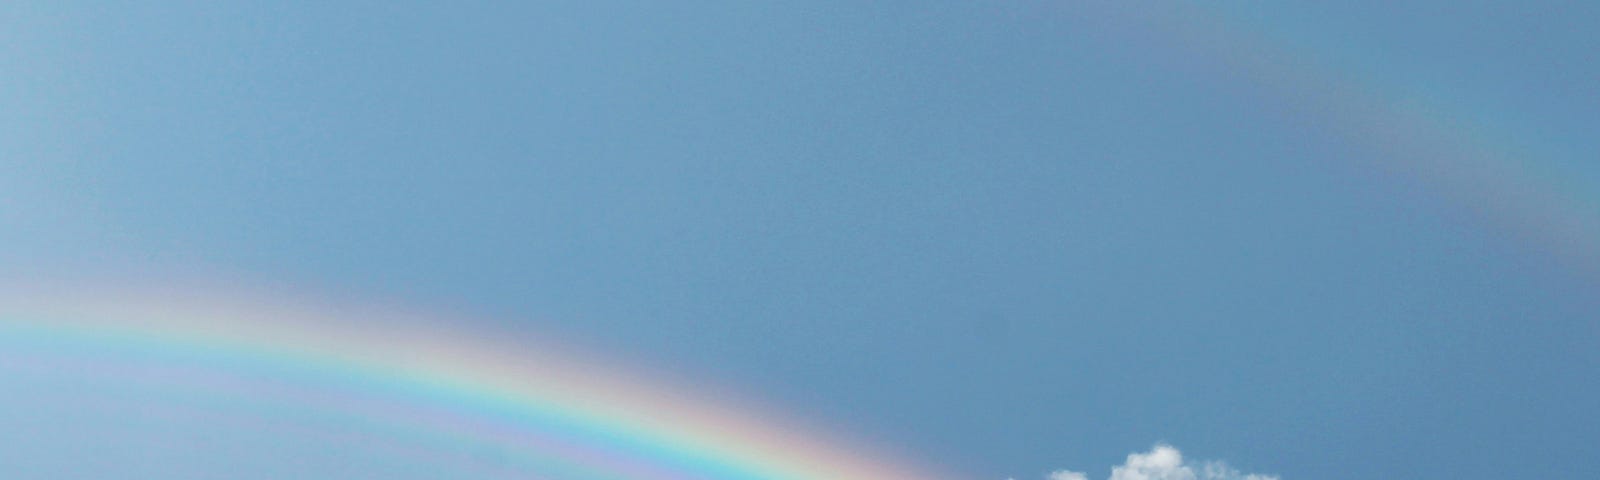 A rainbow across the blue sky. There is one solitary cloud covering part of the rainbow and two treetops visible in the lower part of the photo.